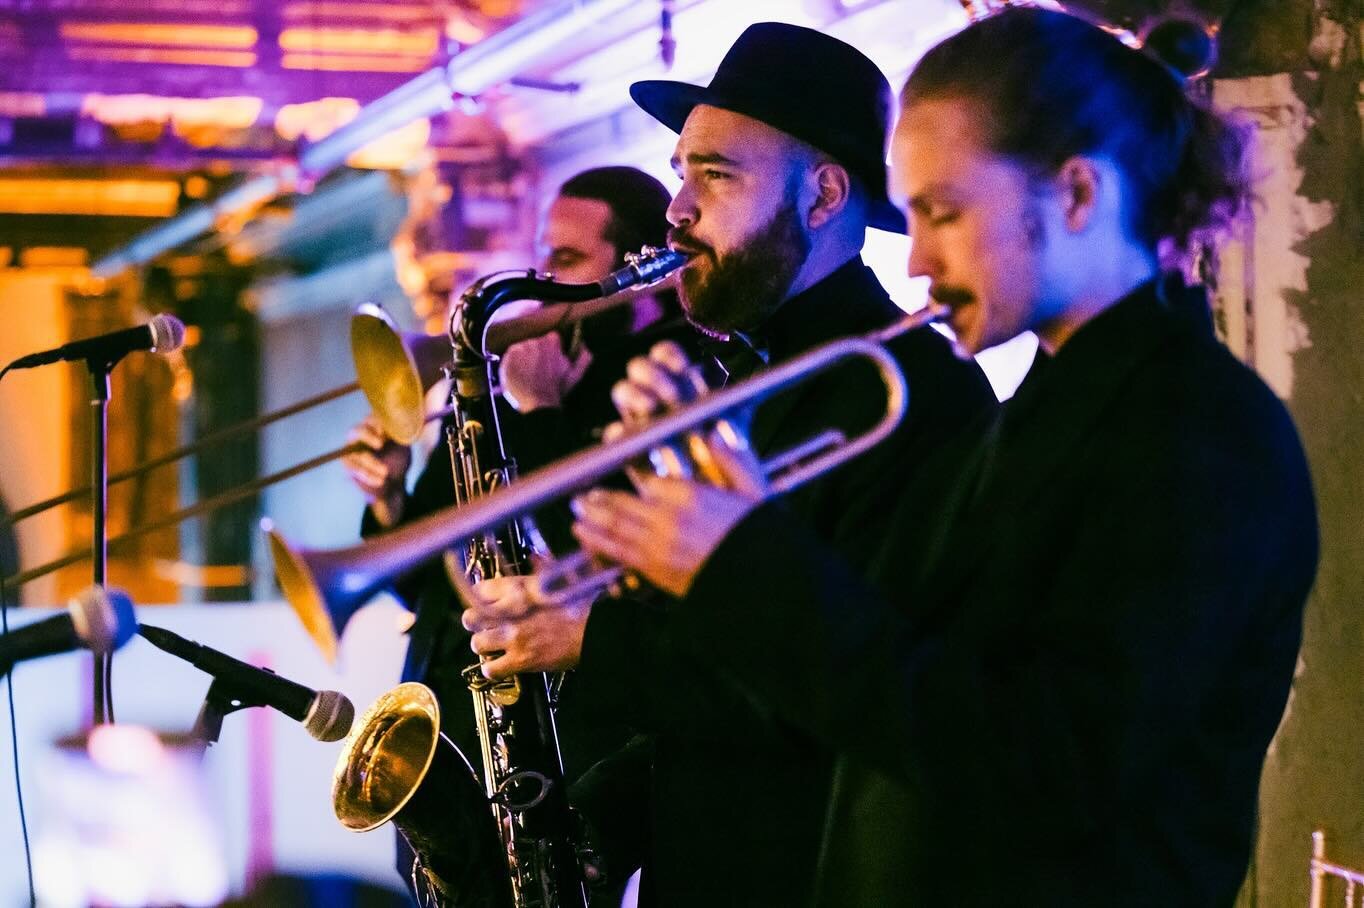 A horn section for cocktail hour and reception? Oh ye, you need that! 📷 : @whatevaphotographs 

#nywedding #visualsoflife #artofvisuals
#nybride&nbsp;&nbsp;#nyweddingplanner #brooklynwedding #njwedding #njweddings #liwedding #liweddings #nycwedding 